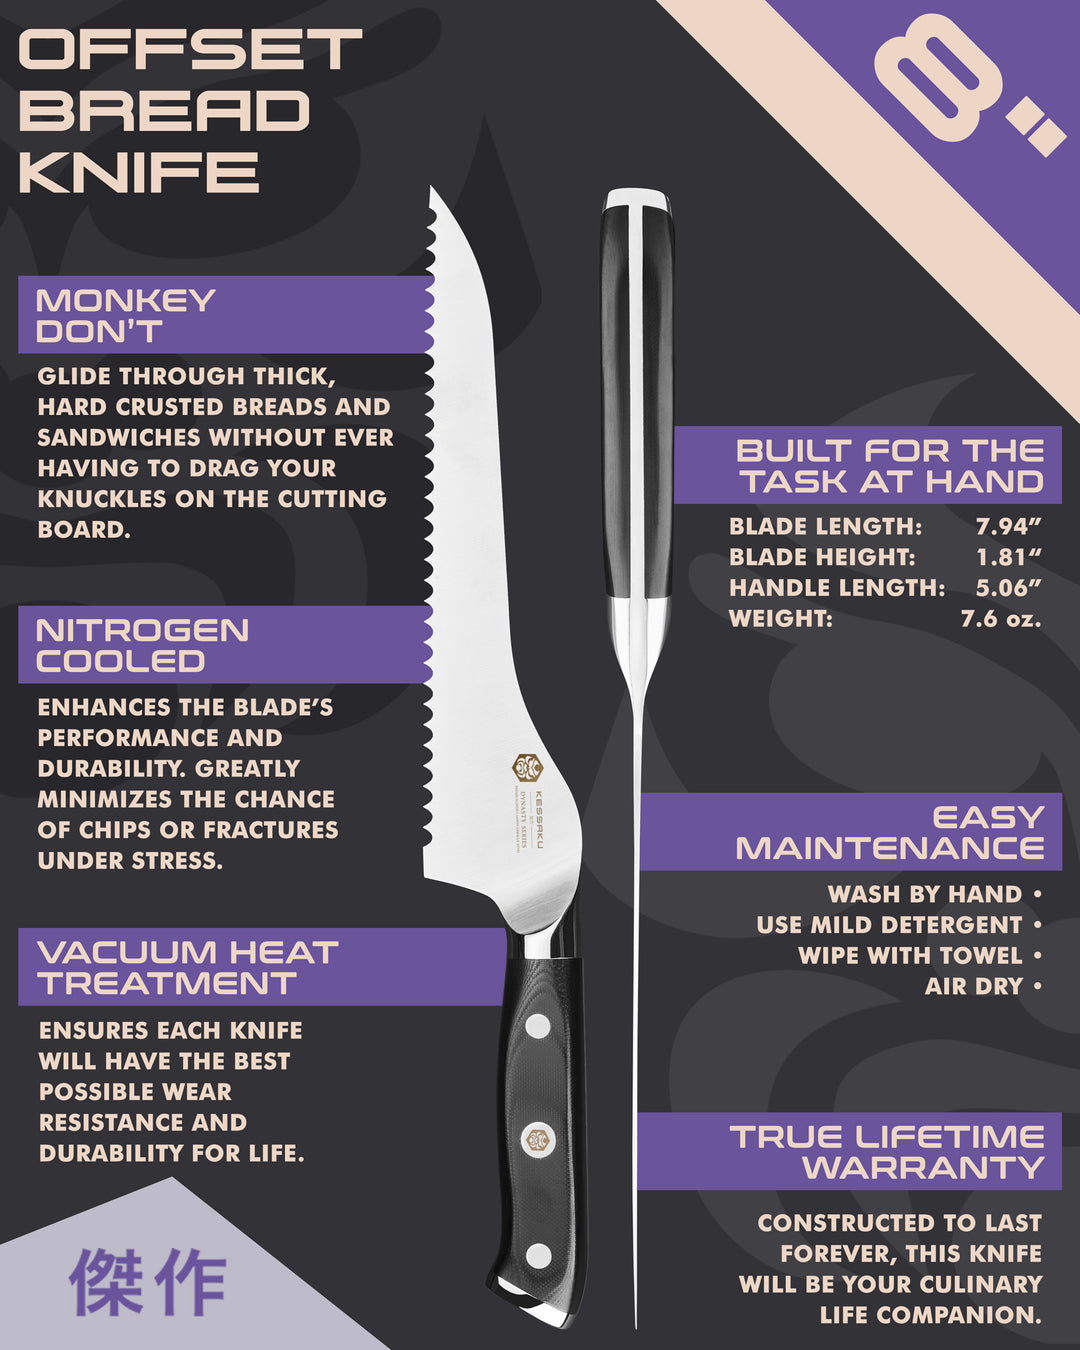 Kessaku Dynasty Series Offset Bread Knife uses, dimensions, maintenance, warranty info, and additional blade treatments